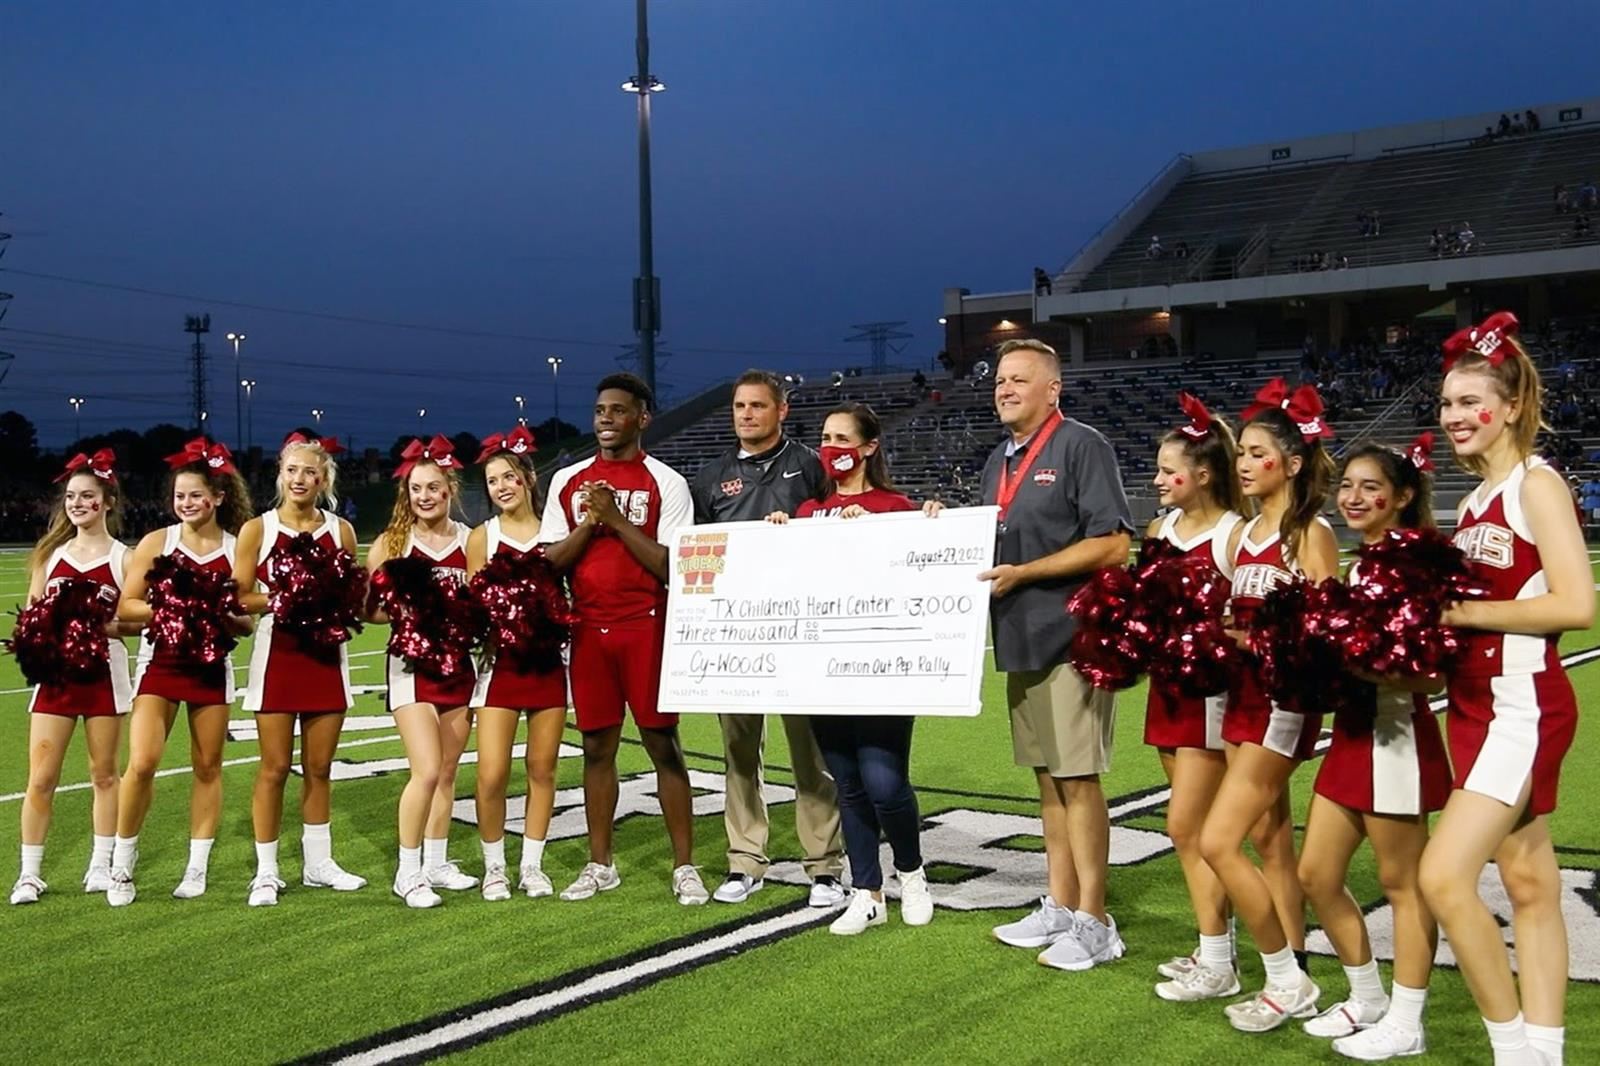 Cy Woods HS students and staff raised $3,000 to the Texas Children’s Heart Center.